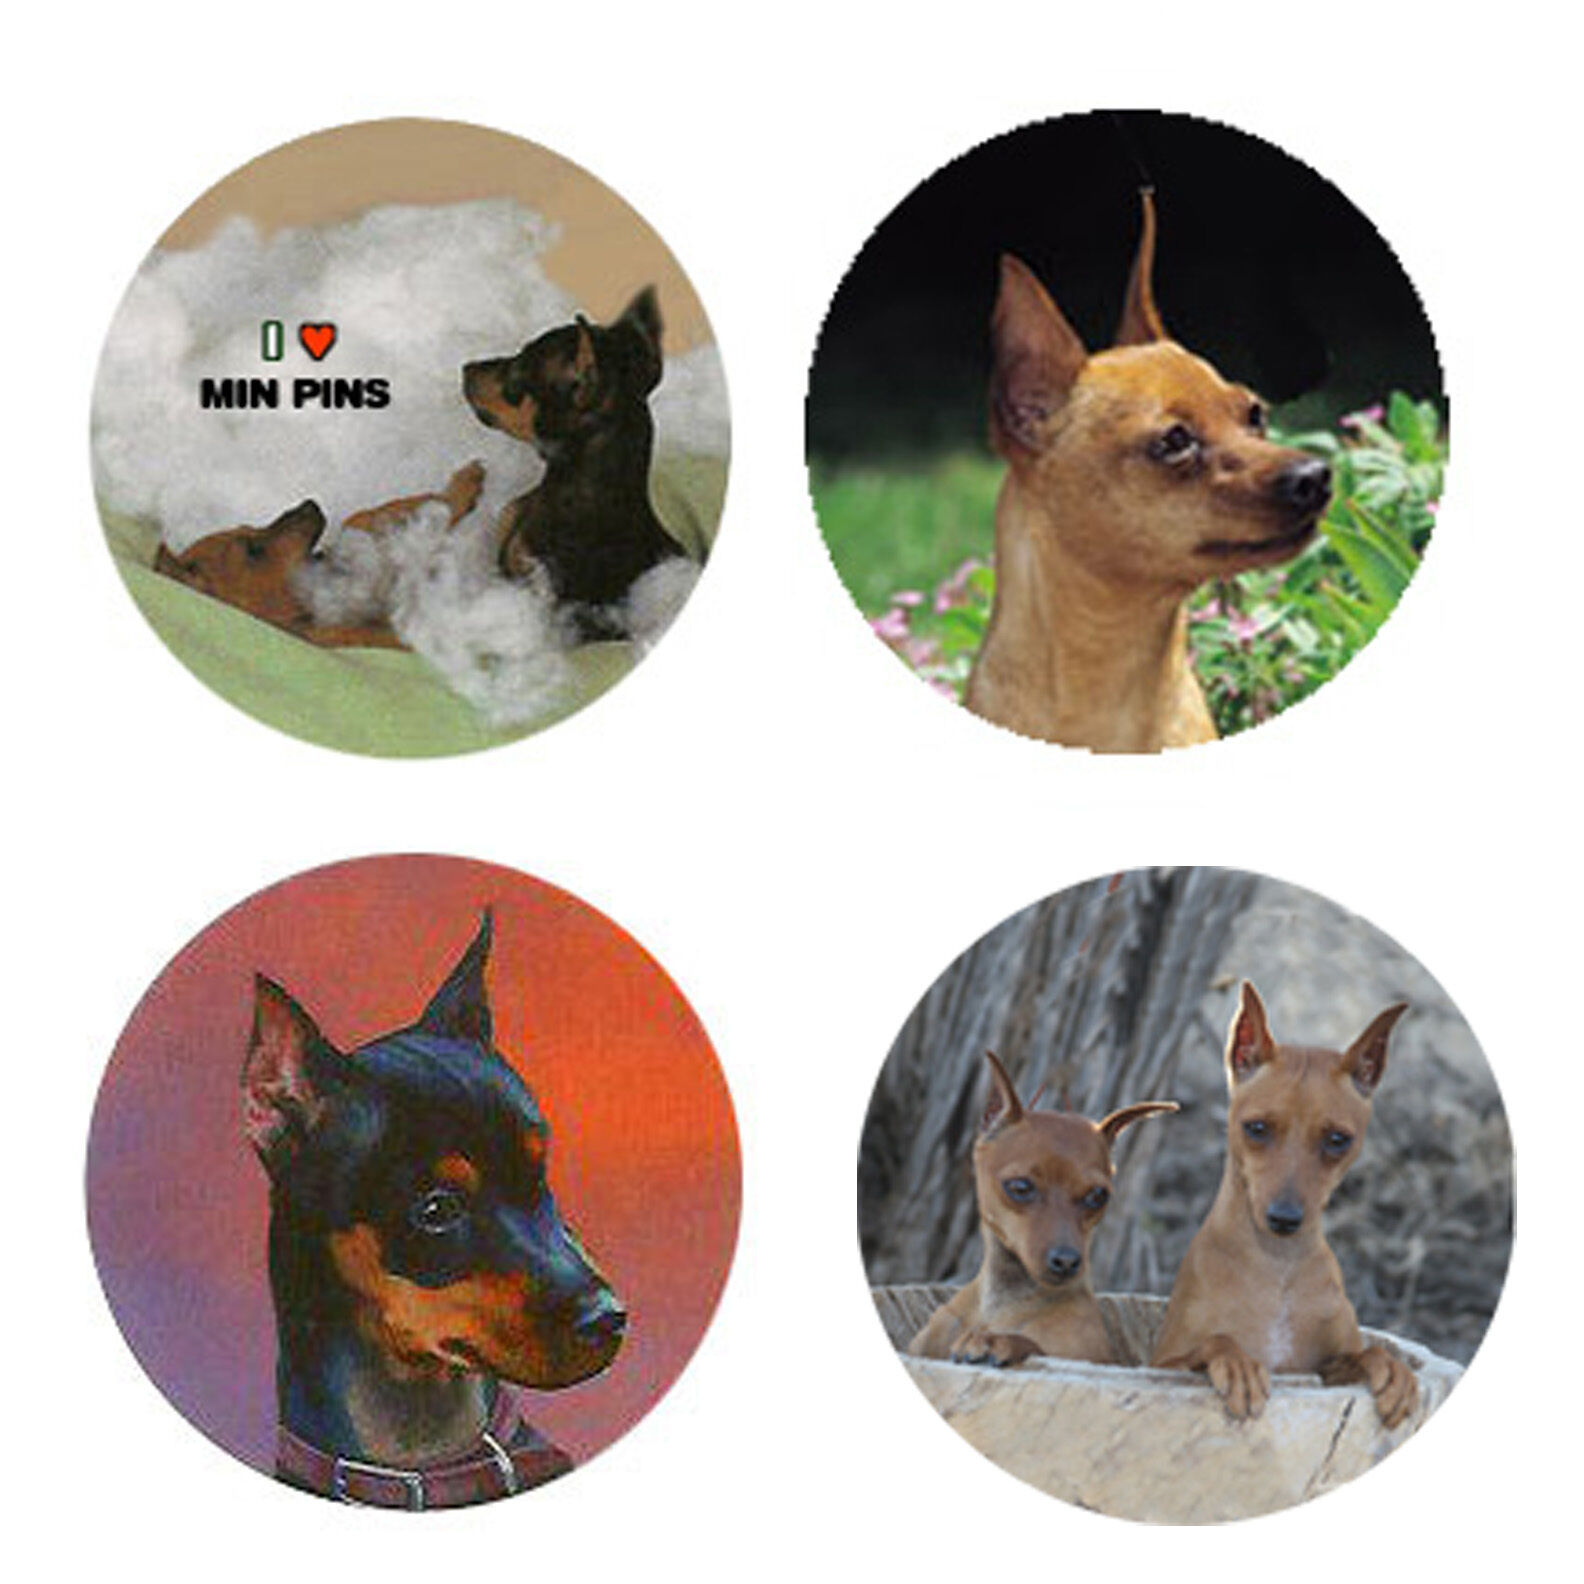 Miniature Pinscher Magnets :4 Min Pins 4 Your Fridge Or Collection-a Great Gift